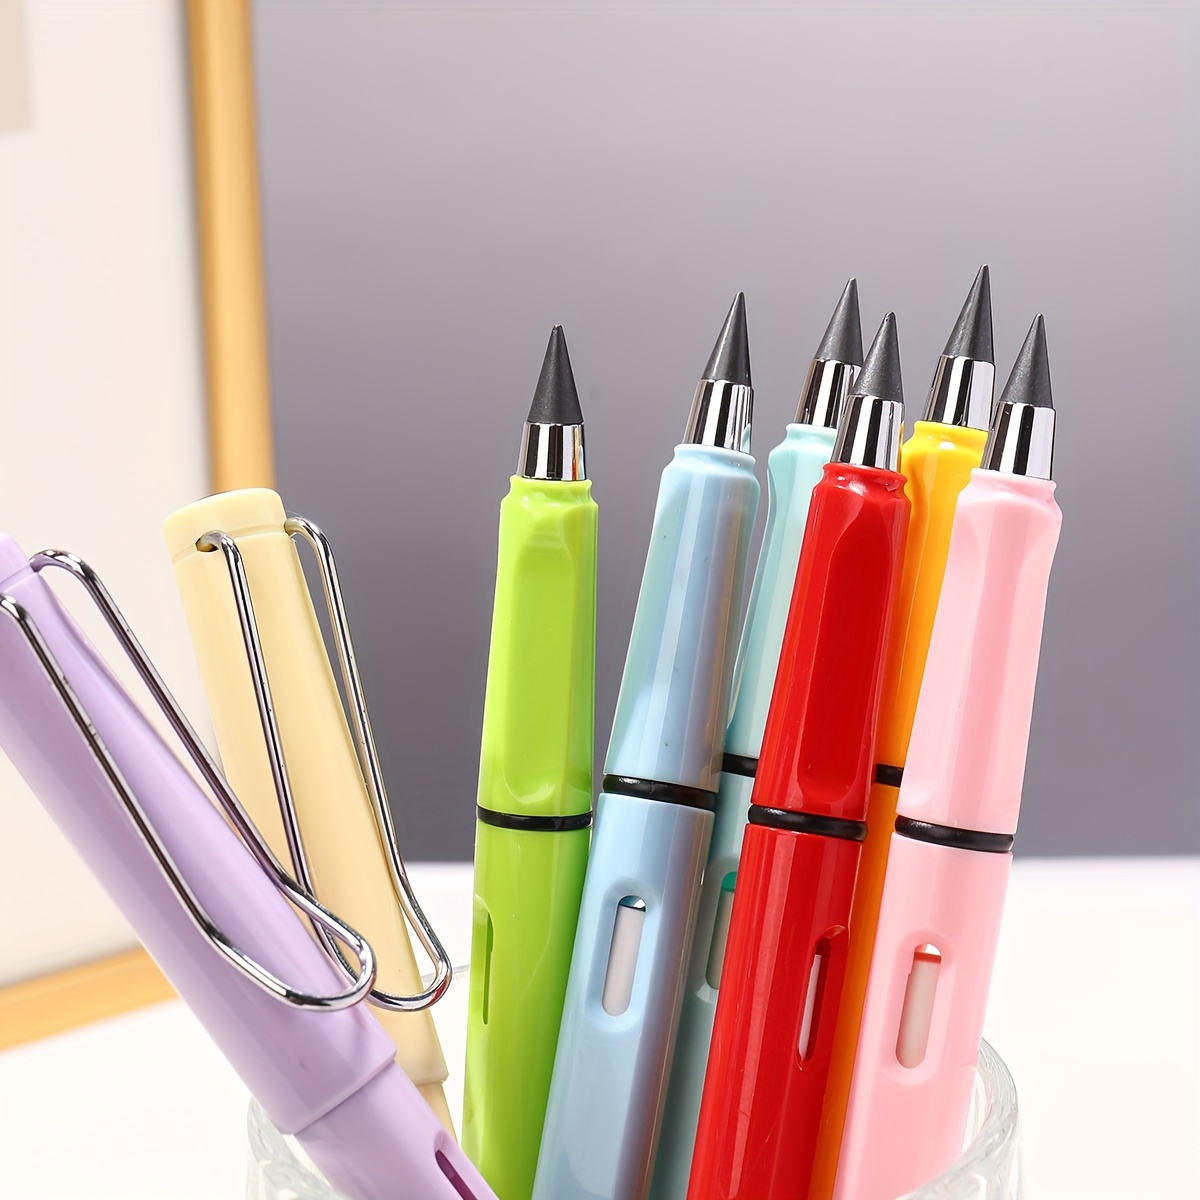 Everlasting Pencil Infinite Pencil Technology Inkless Metal Pen Magic  Pencils Drawing Is Not Easy To Break The Straight Pencil - AliExpress